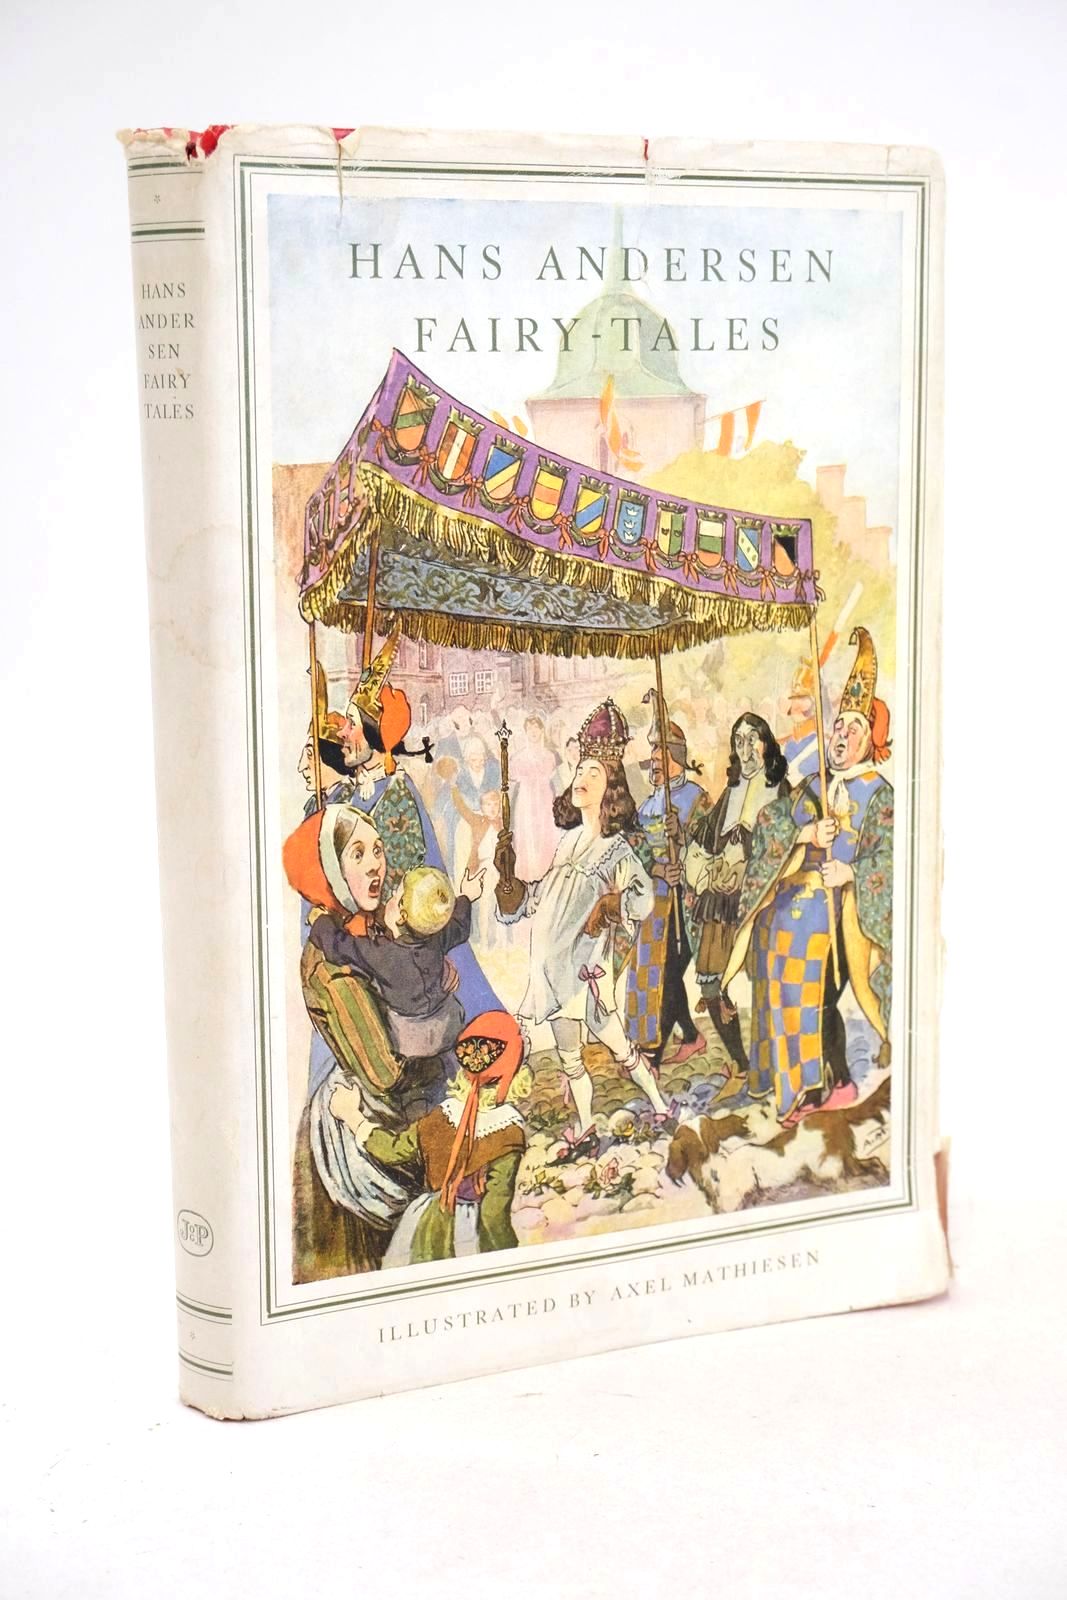 Photo of HANS ANDERSEN FAIRY-TALES written by Andersen, Hans Christian illustrated by Mathiesen, Axel published by Jespersen & Pio Publishers (STOCK CODE: 1325905)  for sale by Stella & Rose's Books